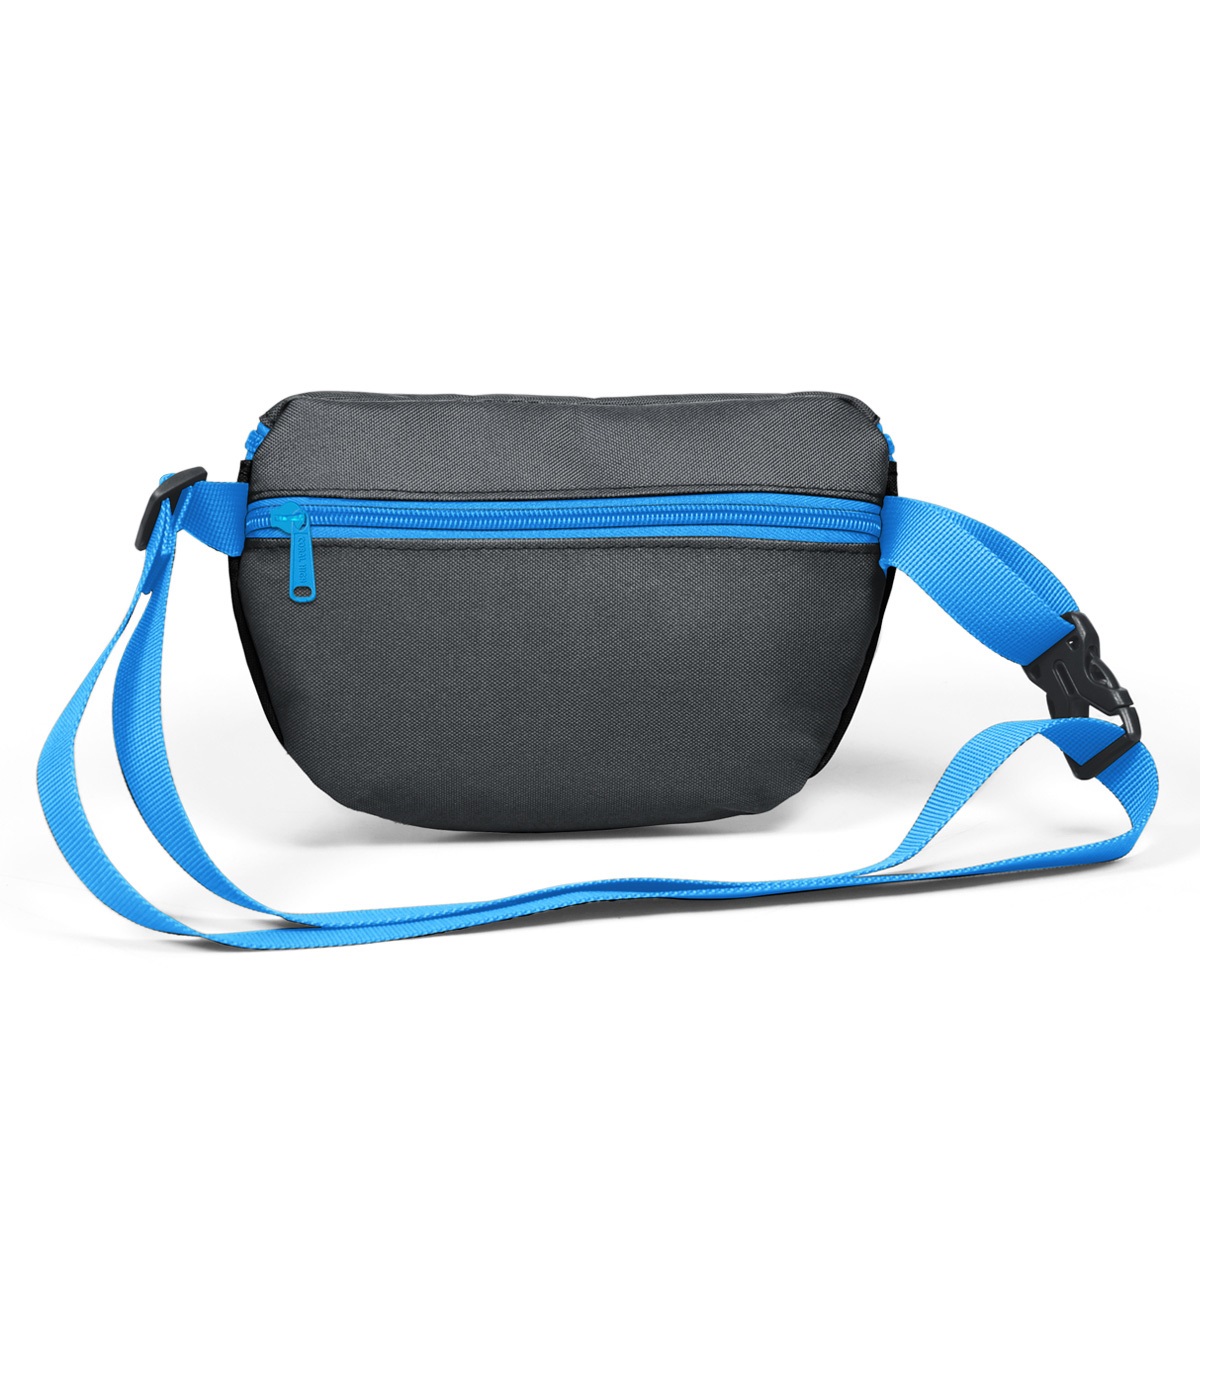 Coral High Sport Two Compartment Waist Bag - Black Dark Gray